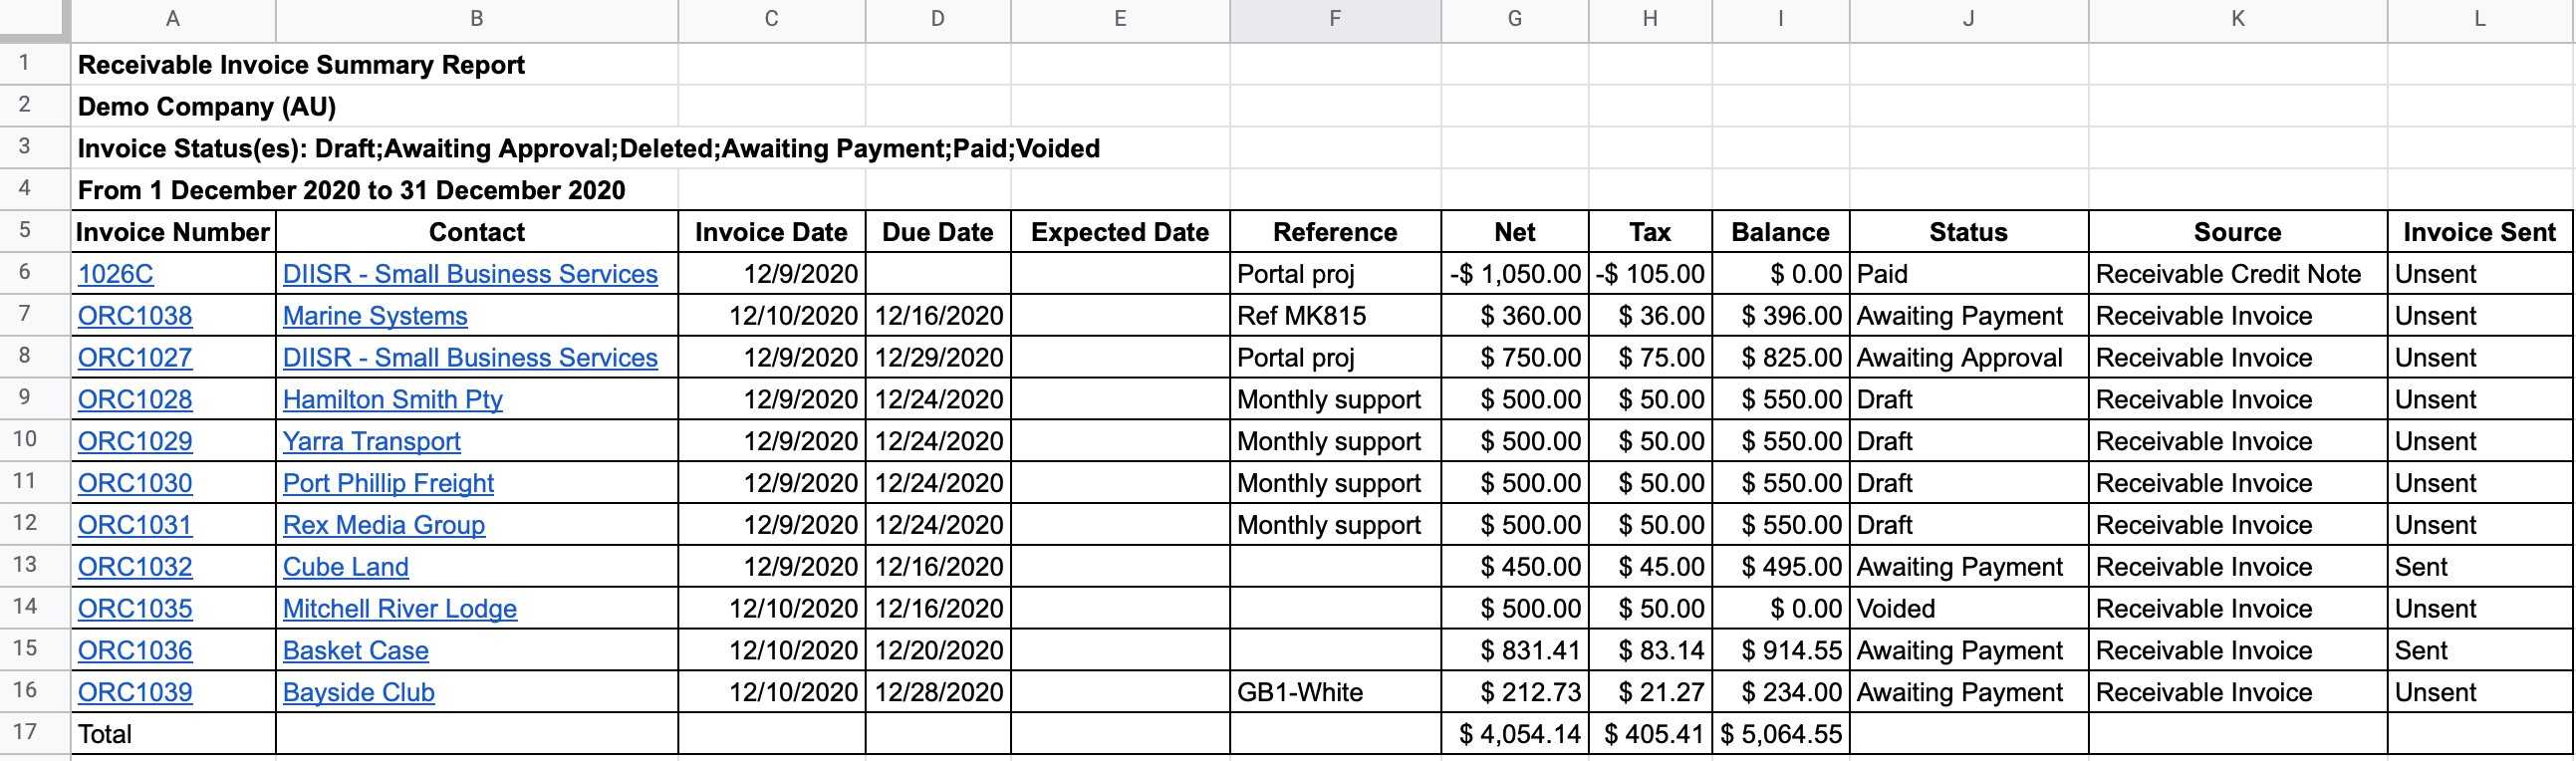 Receivable Invoice Summary Xero Reports in Google Sheets Throughout Accounts Receivable Report Template